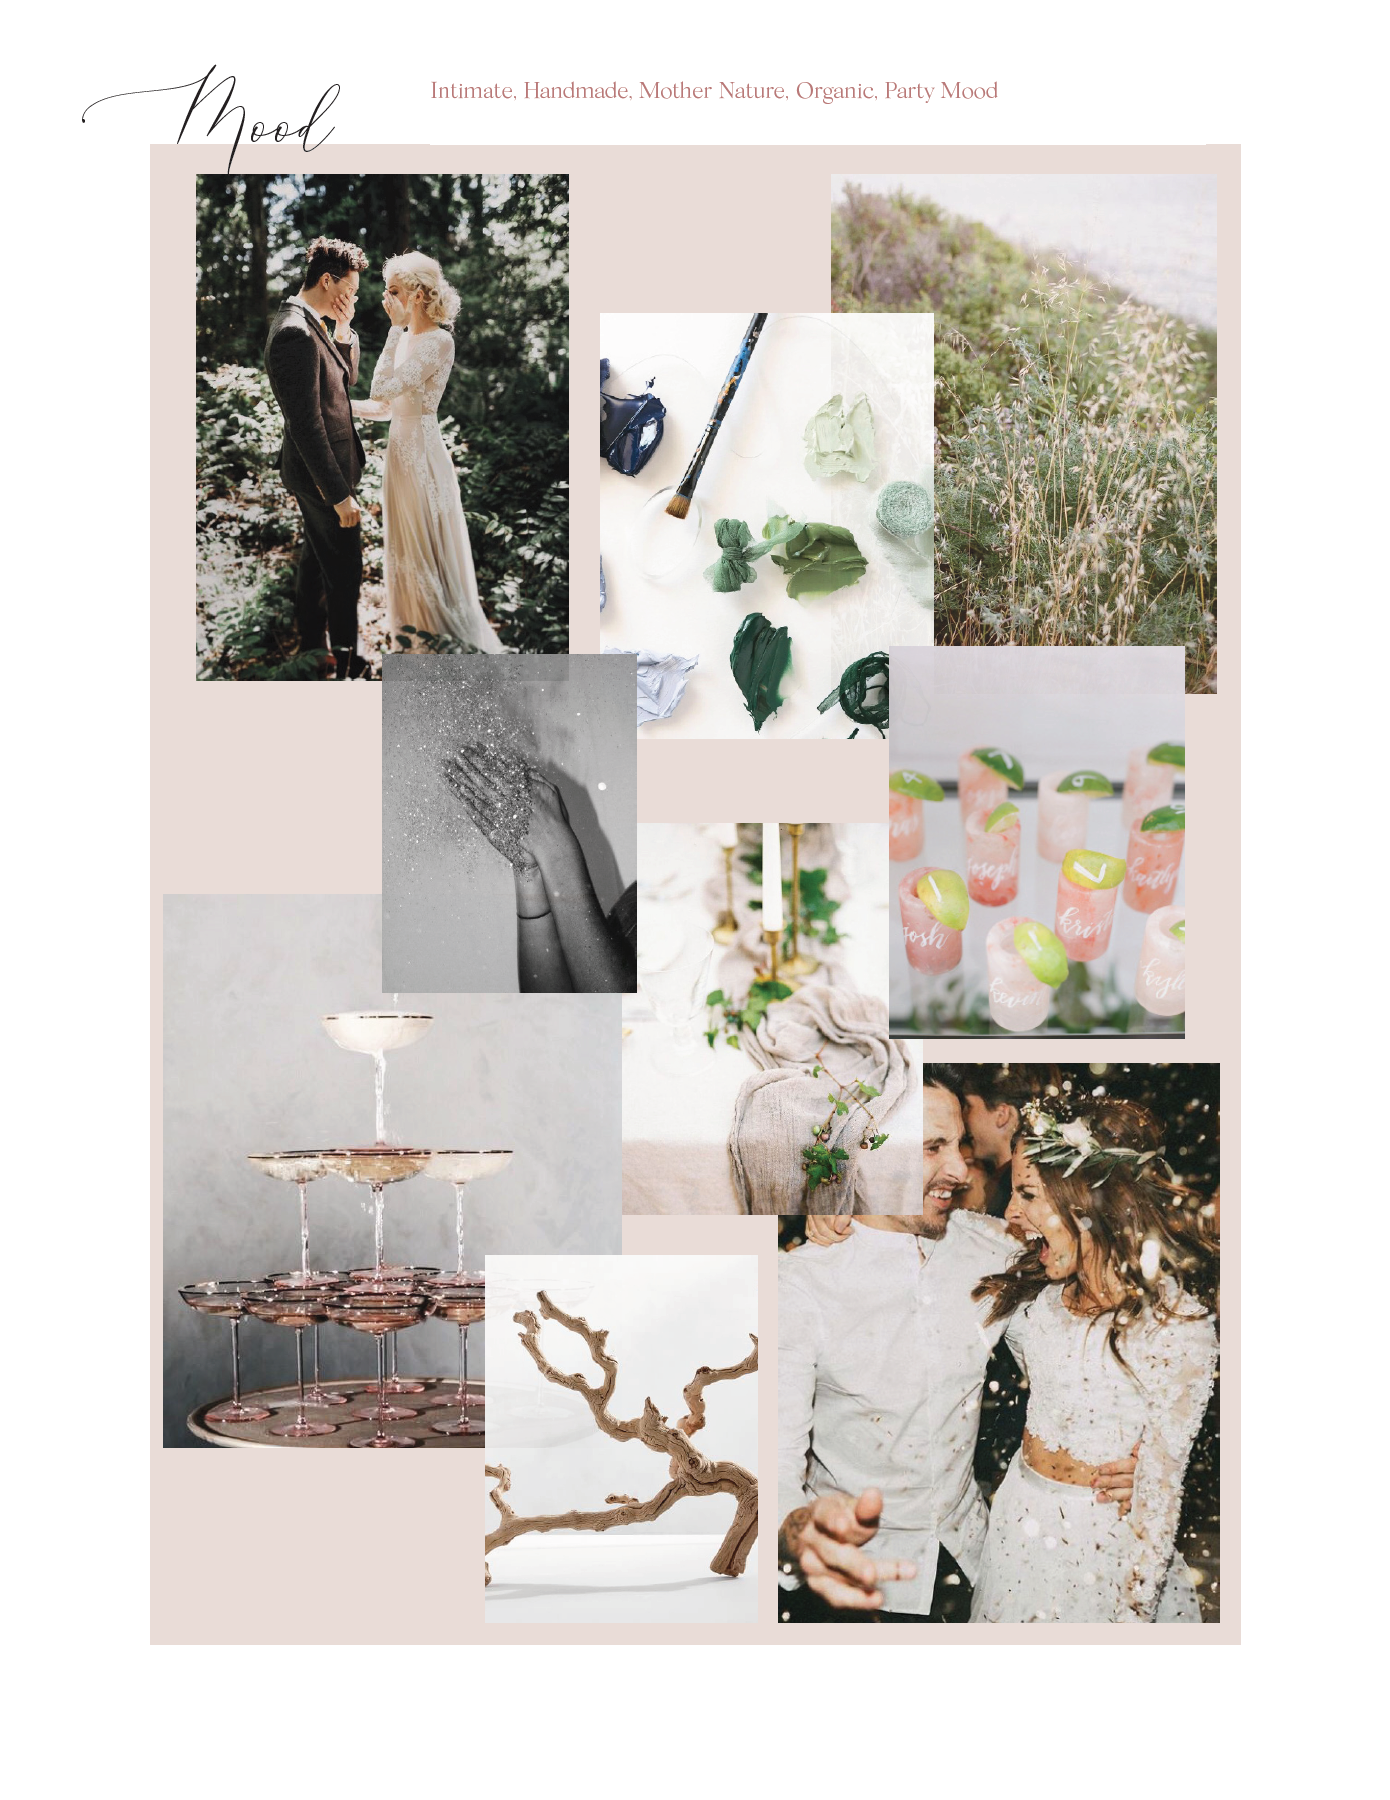 Charleston garden wedding moodboard featuring intimate, handmade, organic, Mother Nature and party vibes 